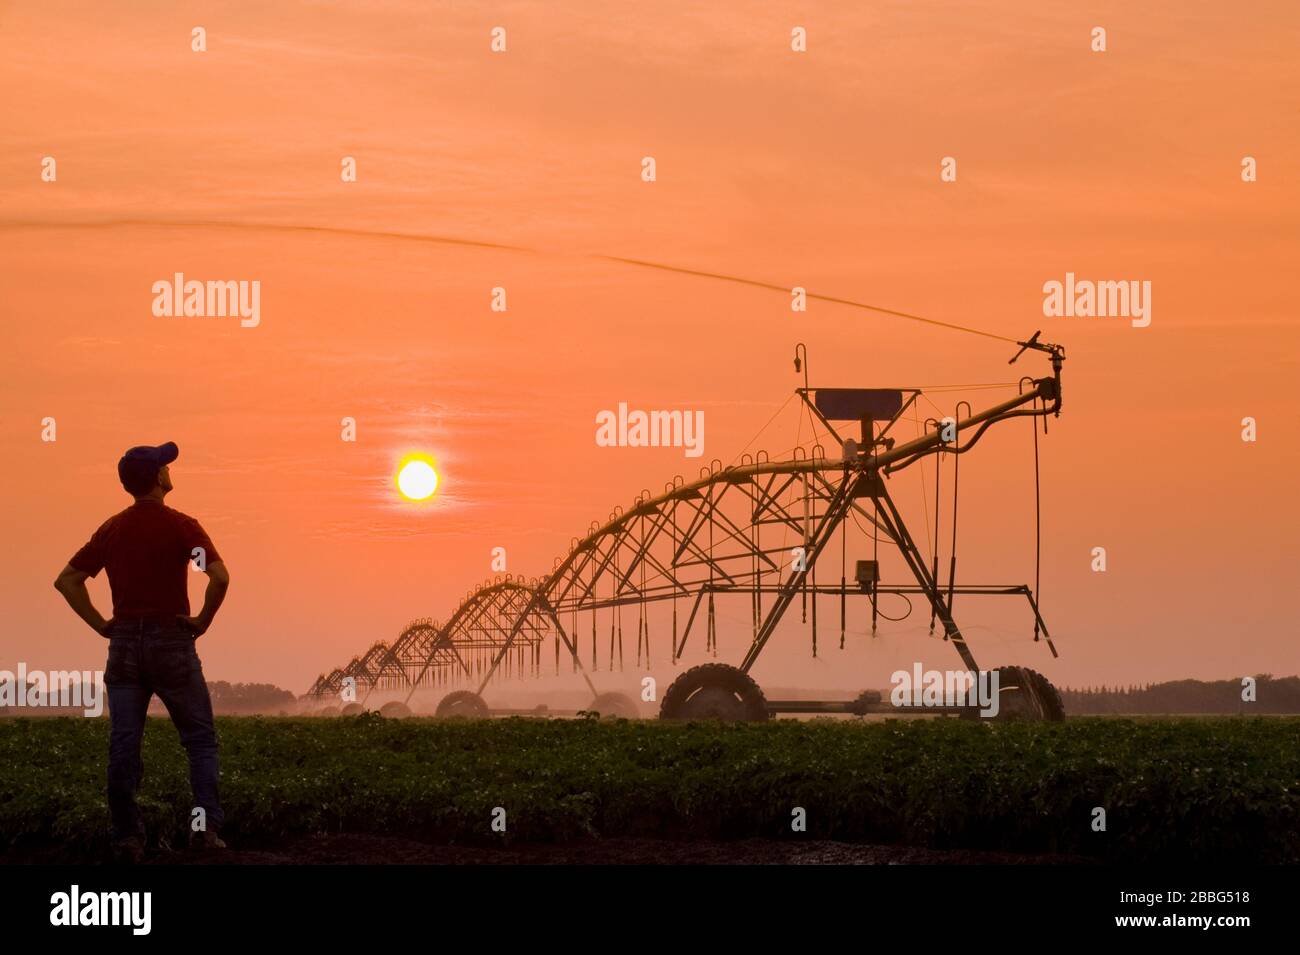 a farmer looks on as a center pivot irrigation system irrigates potatoes at sunset,Tiger Hills, Manitoba, Canada Stock Photo